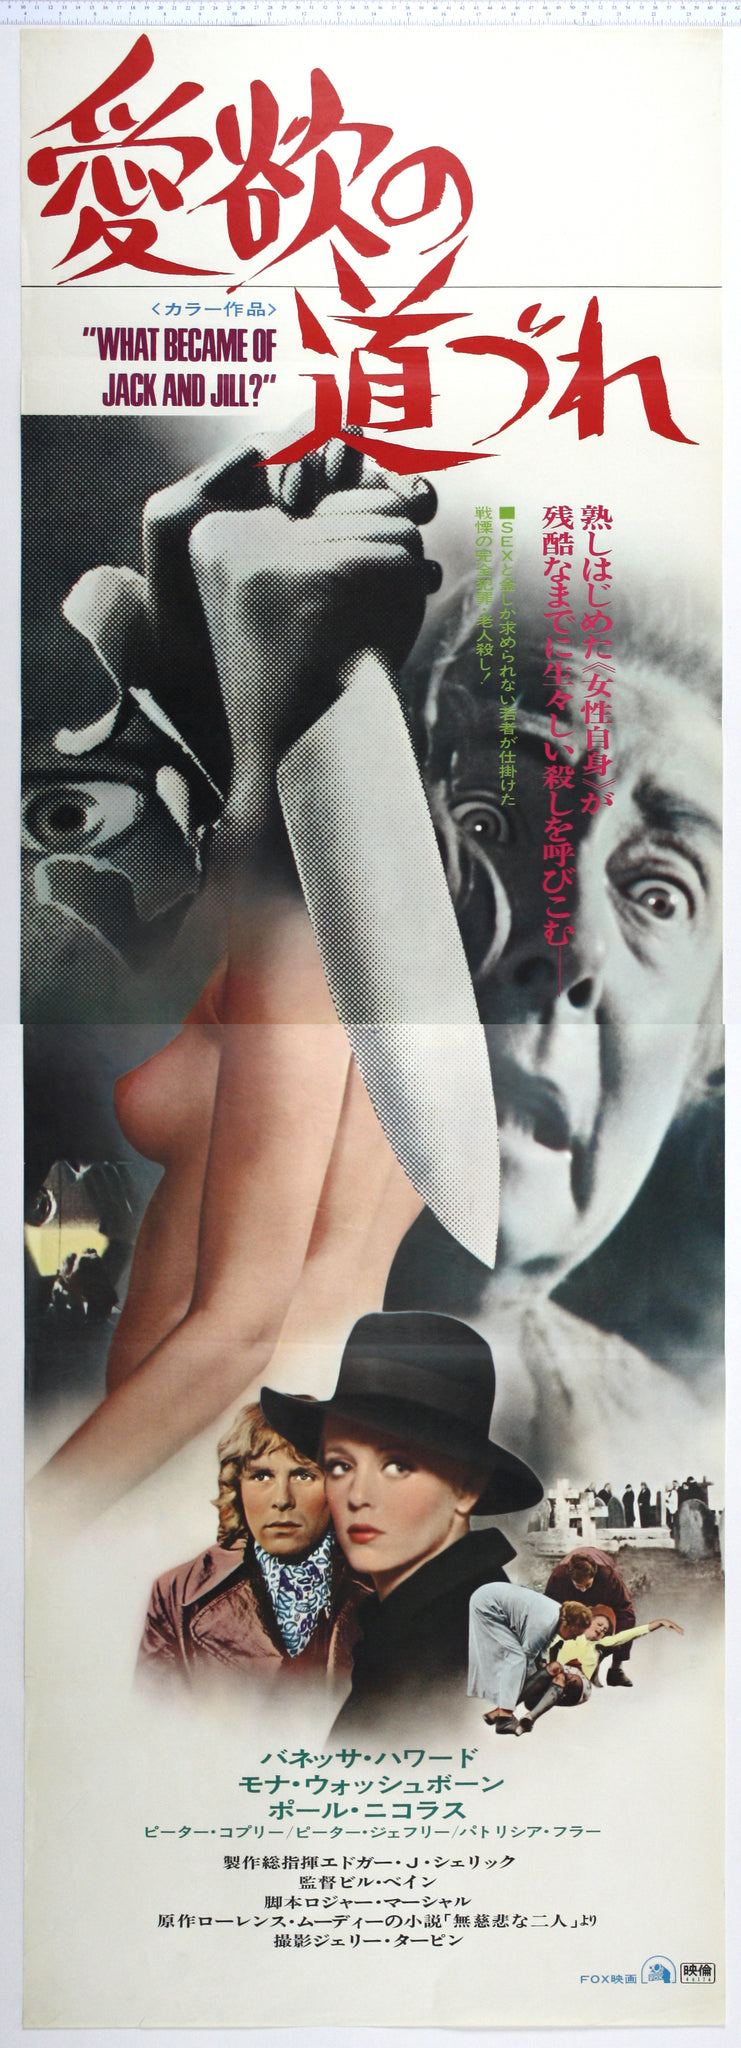 Photo montage od knife, eye and old woman at top, naked torso, the lovers and people discovering body at bottom.